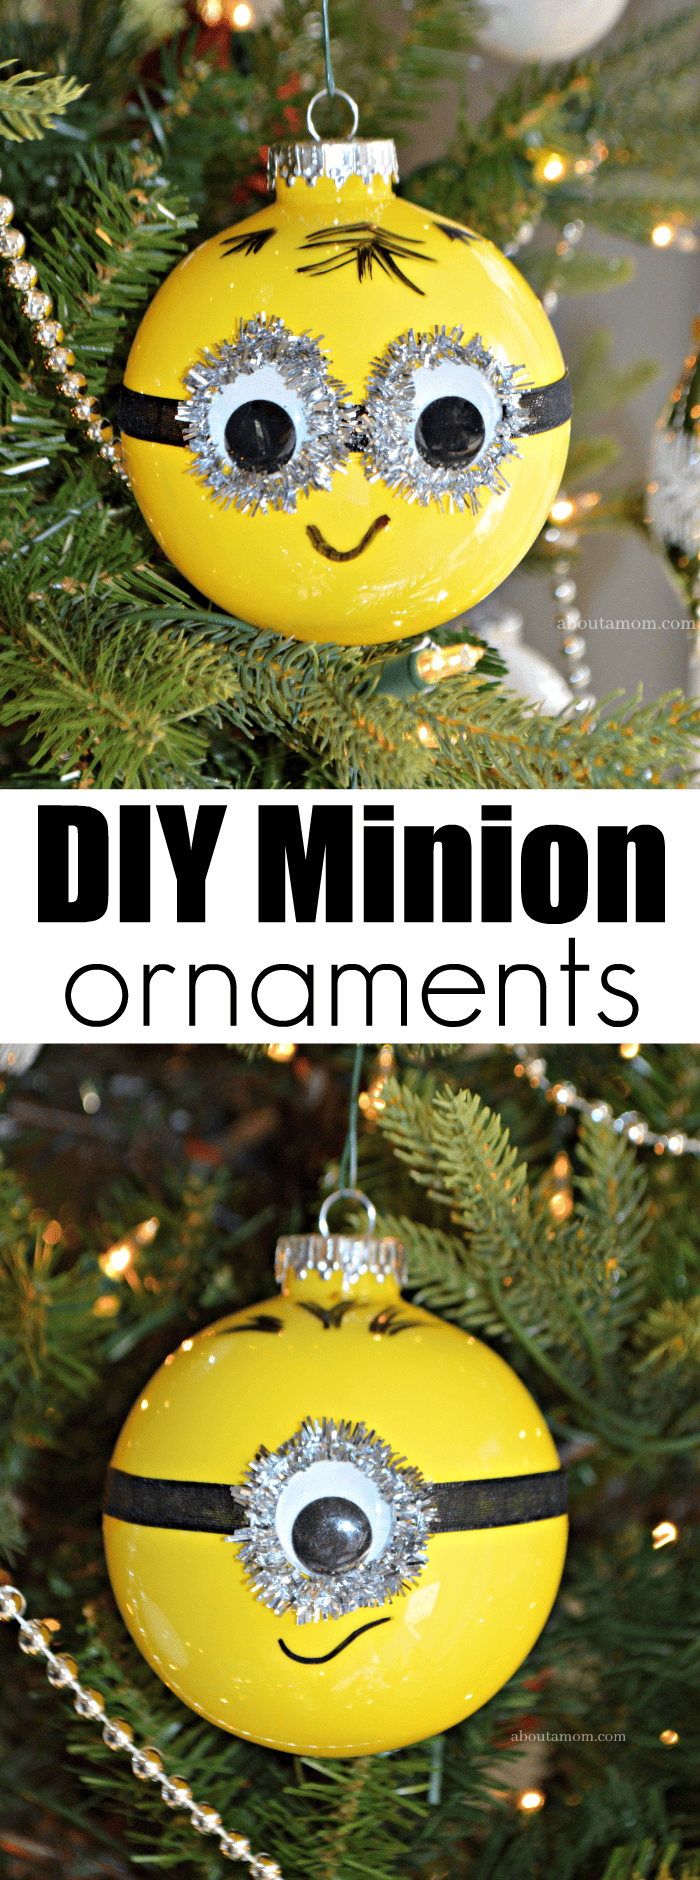 Plastic ball ornaments are used to make these DIY Minion ornaments that are a whole lot of fun and pretty easy to make. A Minion ornament that's perfect for Despicable Me fans young and old alike. 